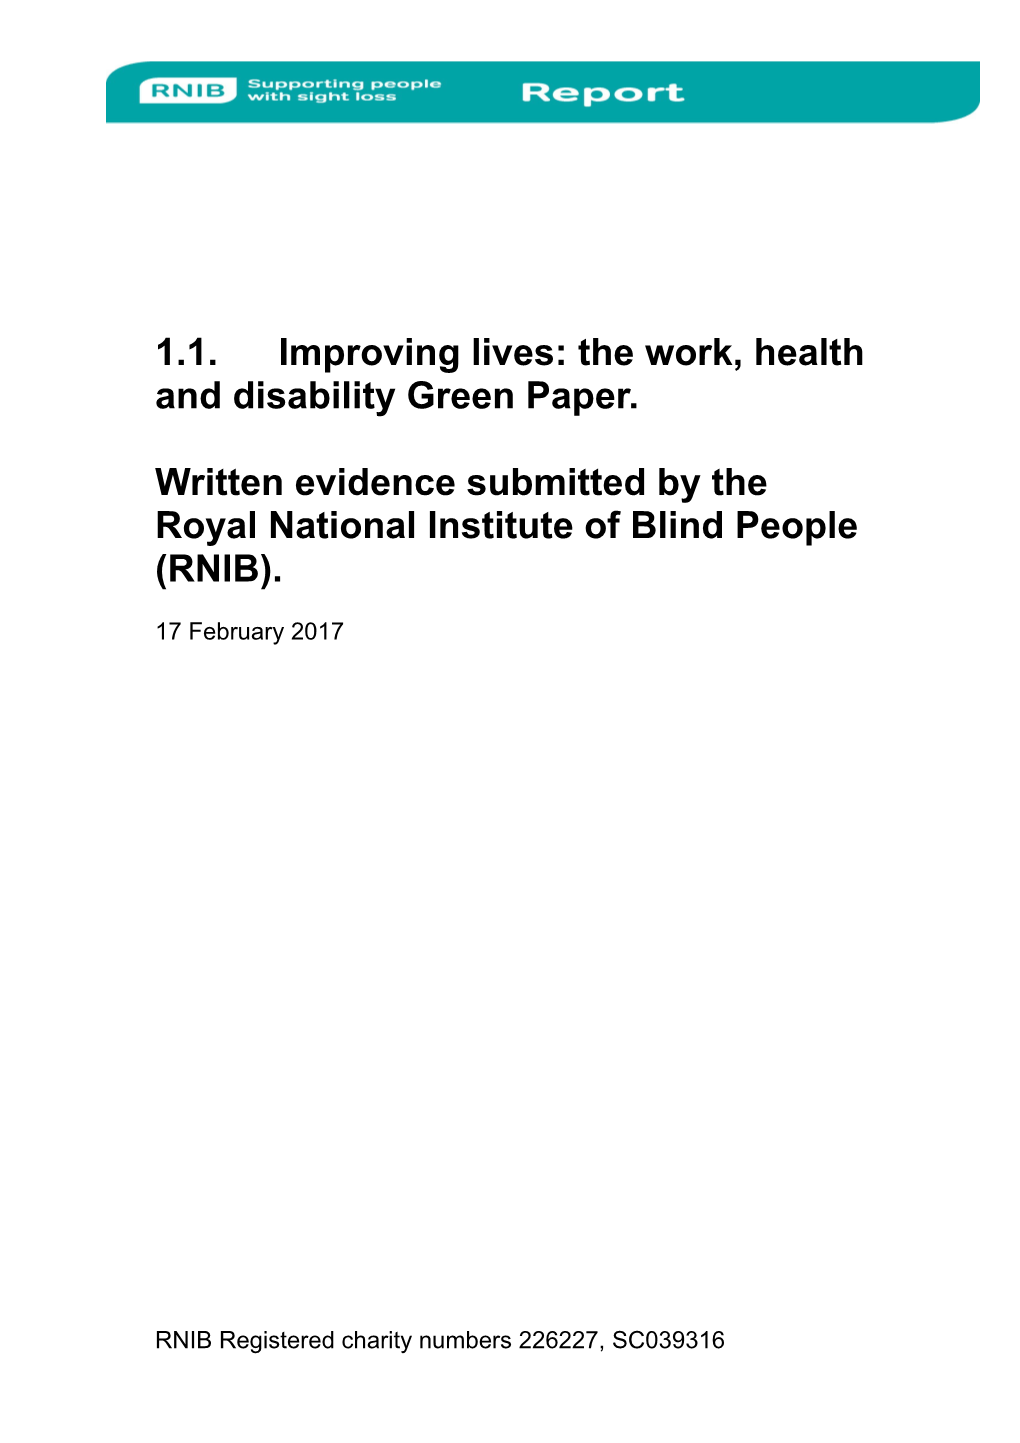 Improving Lives: the Work, Health and Disability Green Paper.Written Evidence Submitted